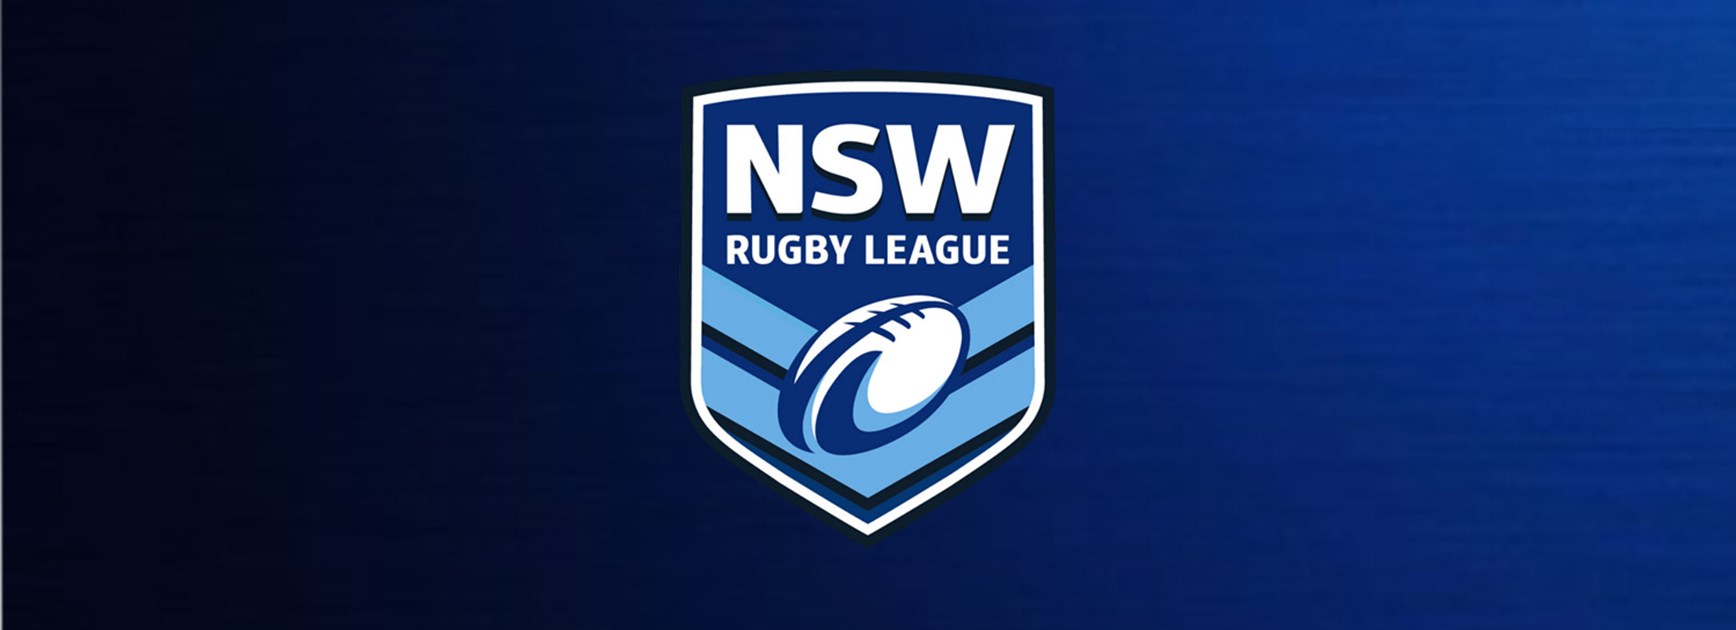 NSWRL competitions – Jersey Flegg and Knock-On Effect Cup